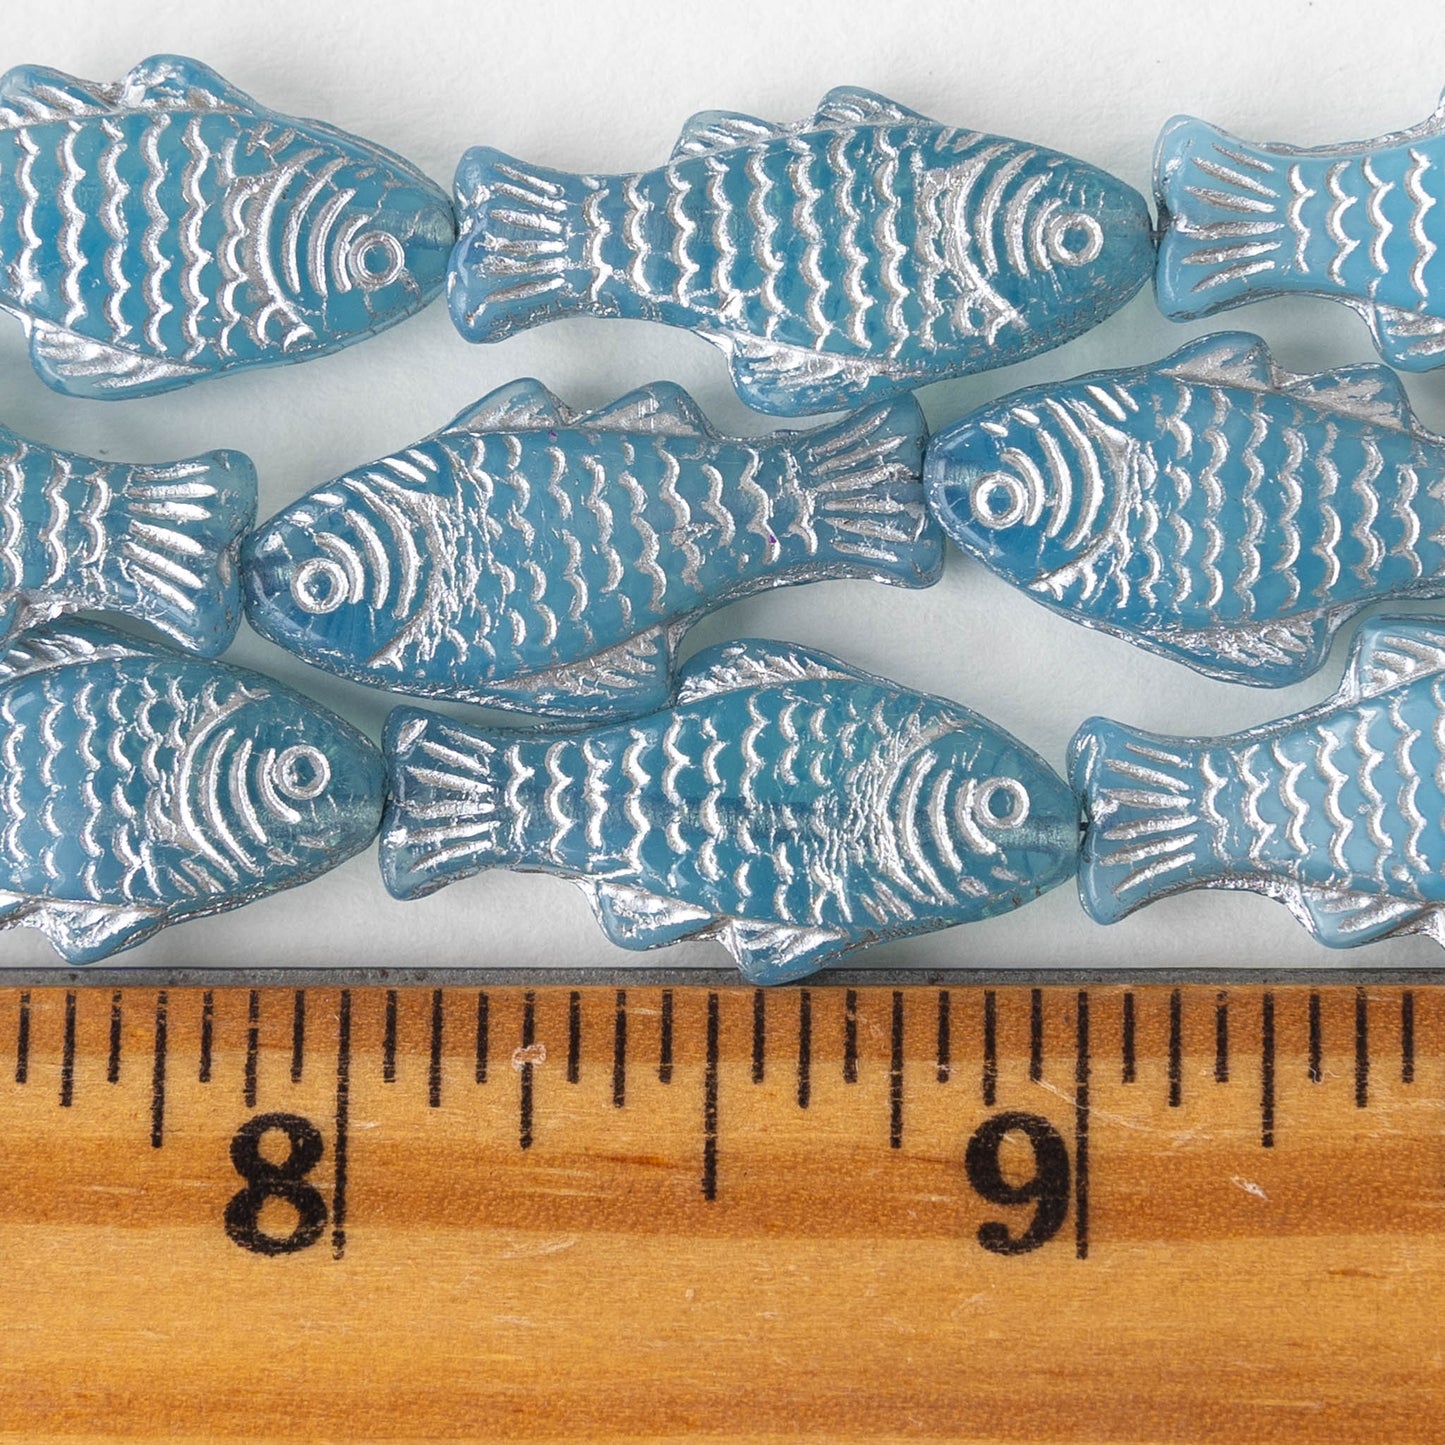 Glass Fish Beads - Blue with Silver Wash - 6 beads